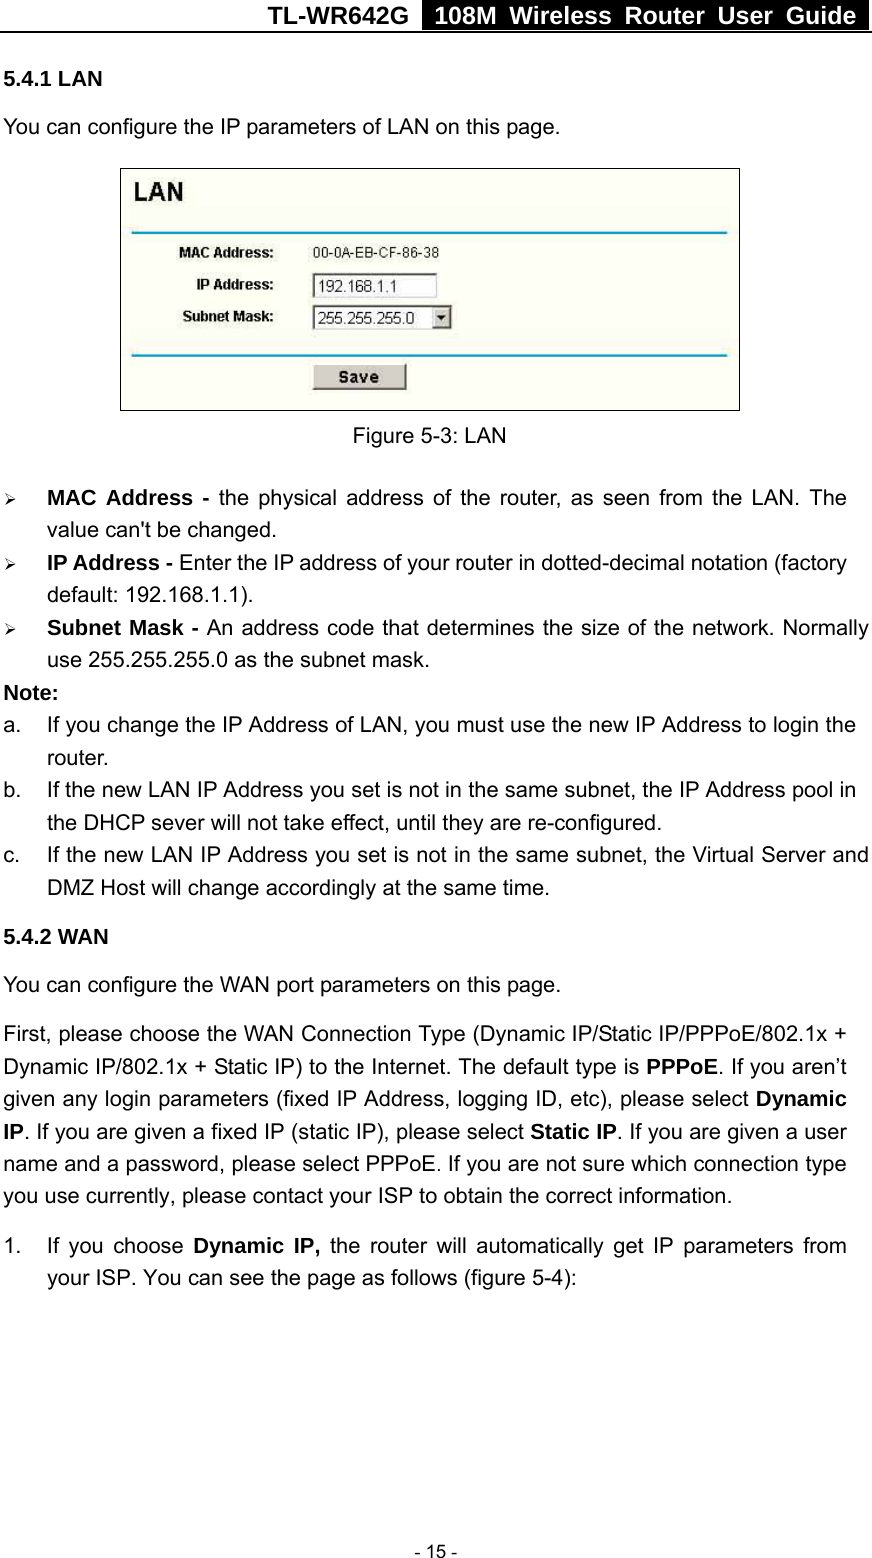 TL-WR642G   108M Wireless Router User Guide   - 15 - 5.4.1 LAN You can configure the IP parameters of LAN on this page.    Figure 5-3: LAN ¾ MAC Address - the physical address of the router, as seen from the LAN. The value can&apos;t be changed. ¾ IP Address - Enter the IP address of your router in dotted-decimal notation (factory default: 192.168.1.1). ¾ Subnet Mask - An address code that determines the size of the network. Normally use 255.255.255.0 as the subnet mask.   Note:  a.  If you change the IP Address of LAN, you must use the new IP Address to login the router.  b.  If the new LAN IP Address you set is not in the same subnet, the IP Address pool in the DHCP sever will not take effect, until they are re-configured. c.  If the new LAN IP Address you set is not in the same subnet, the Virtual Server and DMZ Host will change accordingly at the same time. 5.4.2 WAN You can configure the WAN port parameters on this page. First, please choose the WAN Connection Type (Dynamic IP/Static IP/PPPoE/802.1x + Dynamic IP/802.1x + Static IP) to the Internet. The default type is PPPoE. If you aren’t given any login parameters (fixed IP Address, logging ID, etc), please select Dynamic IP. If you are given a fixed IP (static IP), please select Static IP. If you are given a user name and a password, please select PPPoE. If you are not sure which connection type you use currently, please contact your ISP to obtain the correct information. 1. If you choose Dynamic IP, the router will automatically get IP parameters from your ISP. You can see the page as follows (figure 5-4): 